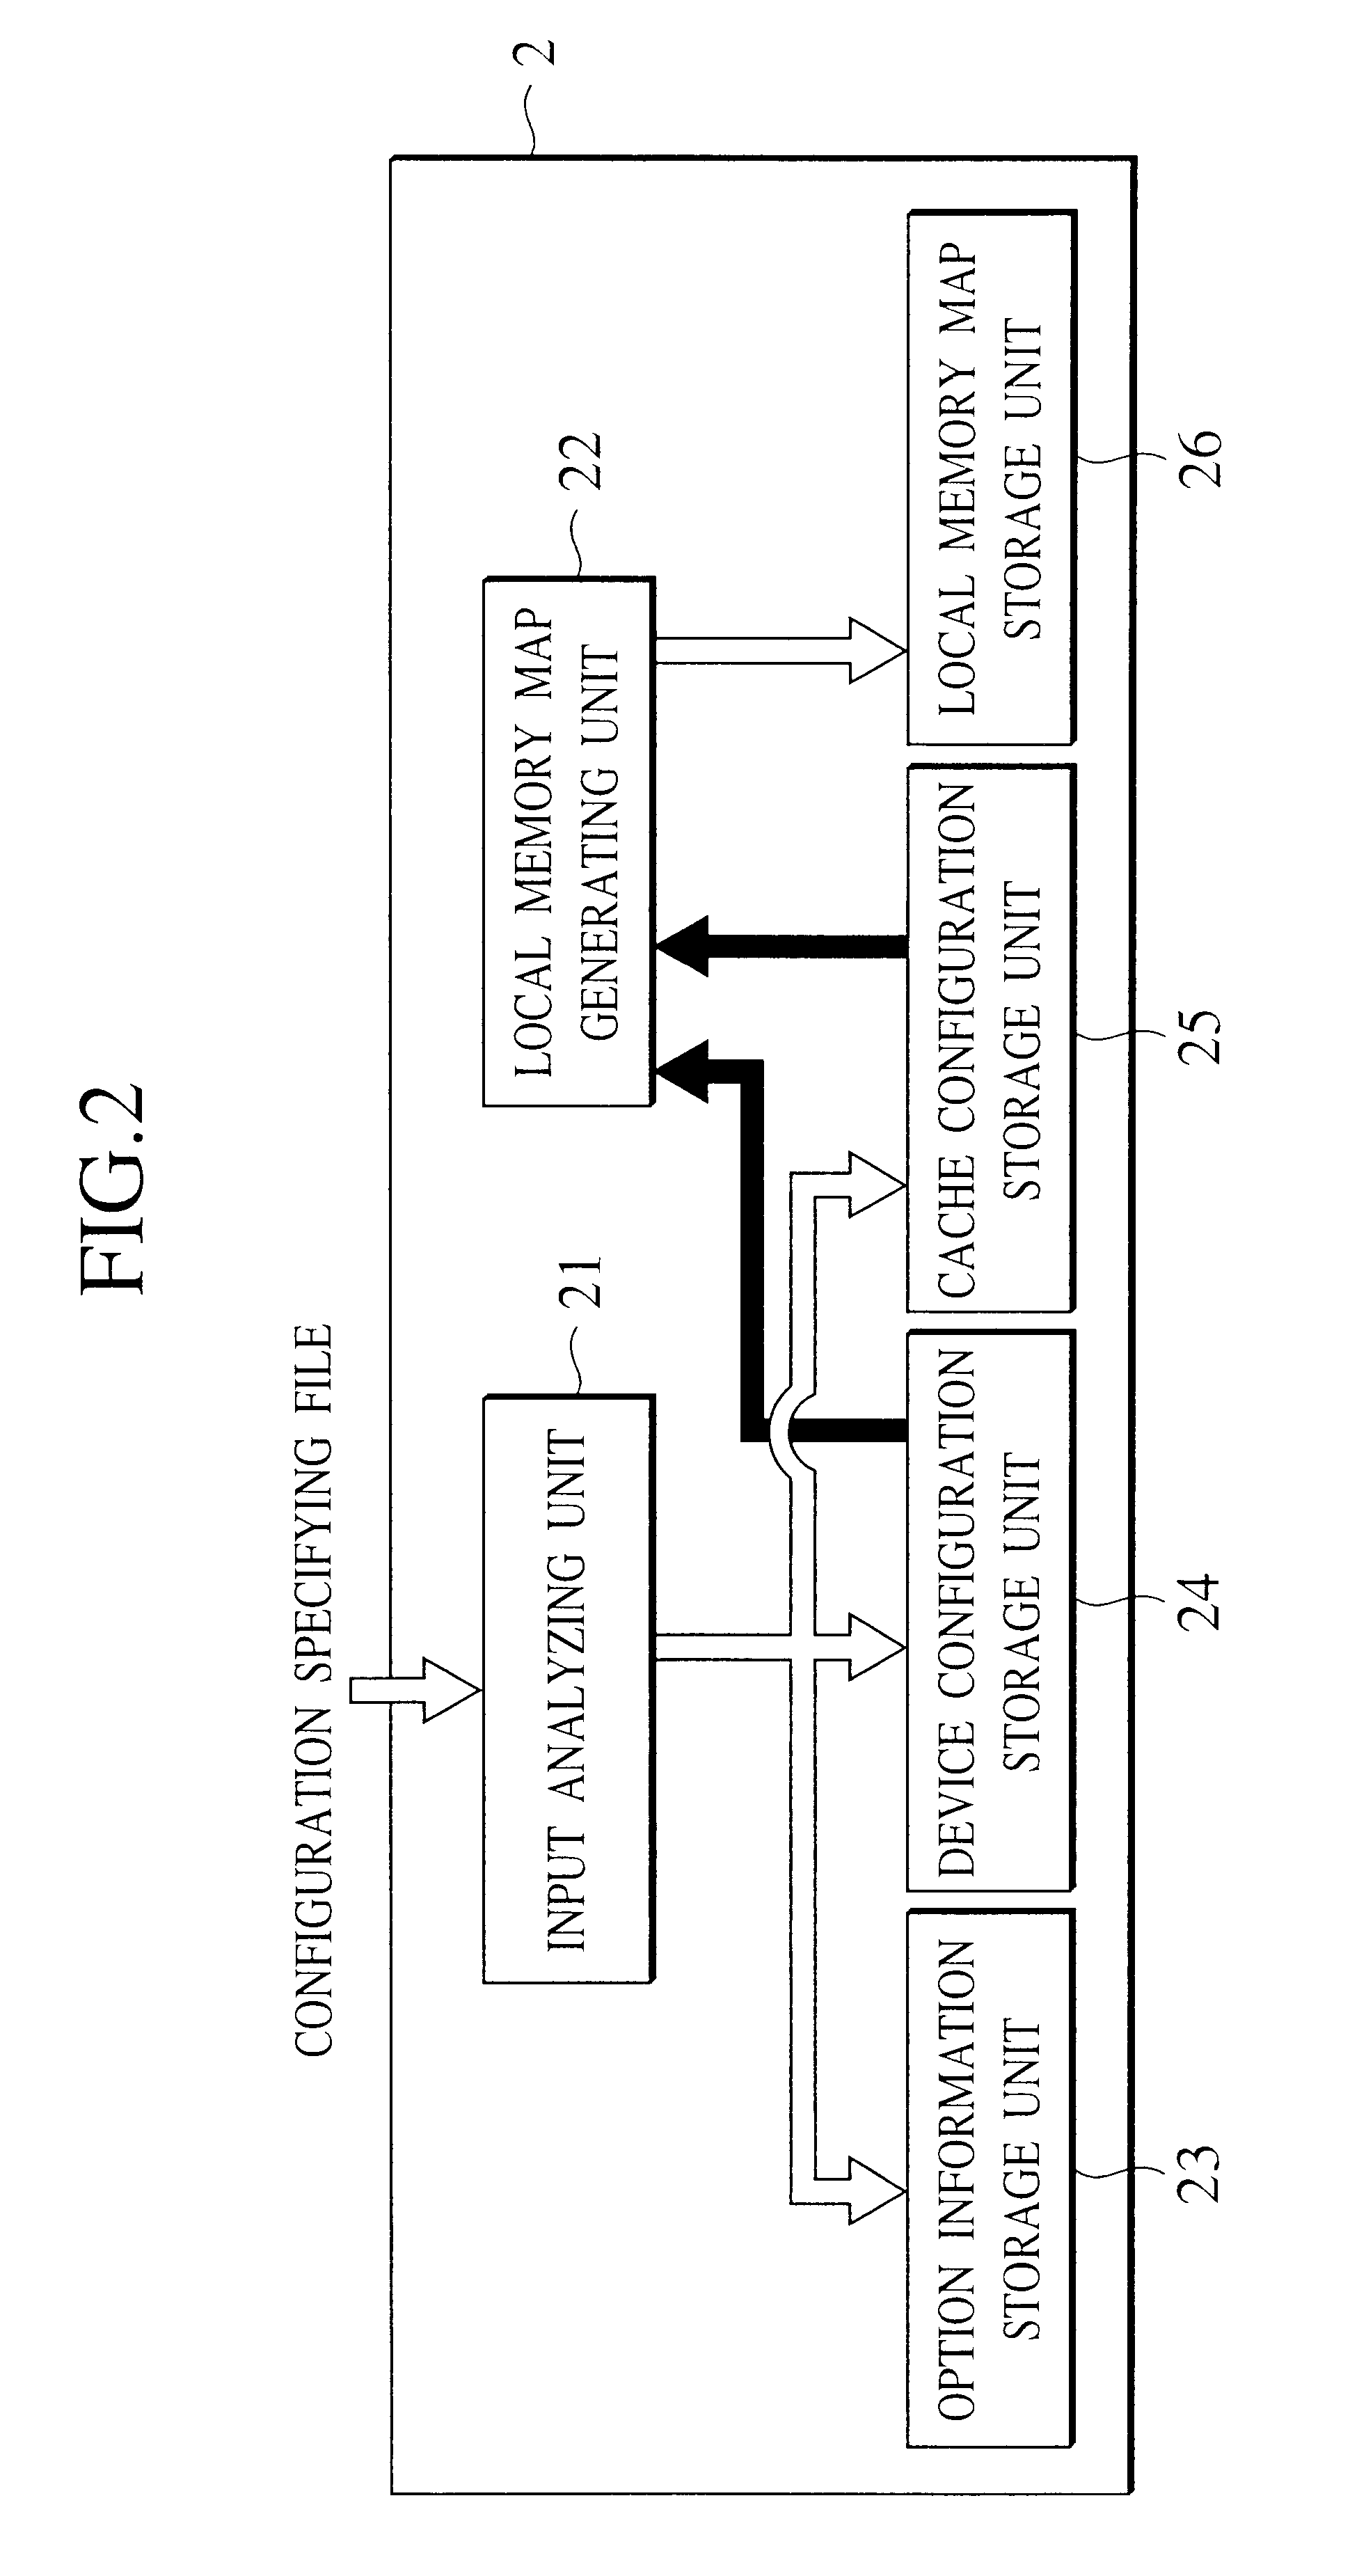 System LSI development apparatus and the method thereof for developing a system optimal to an application